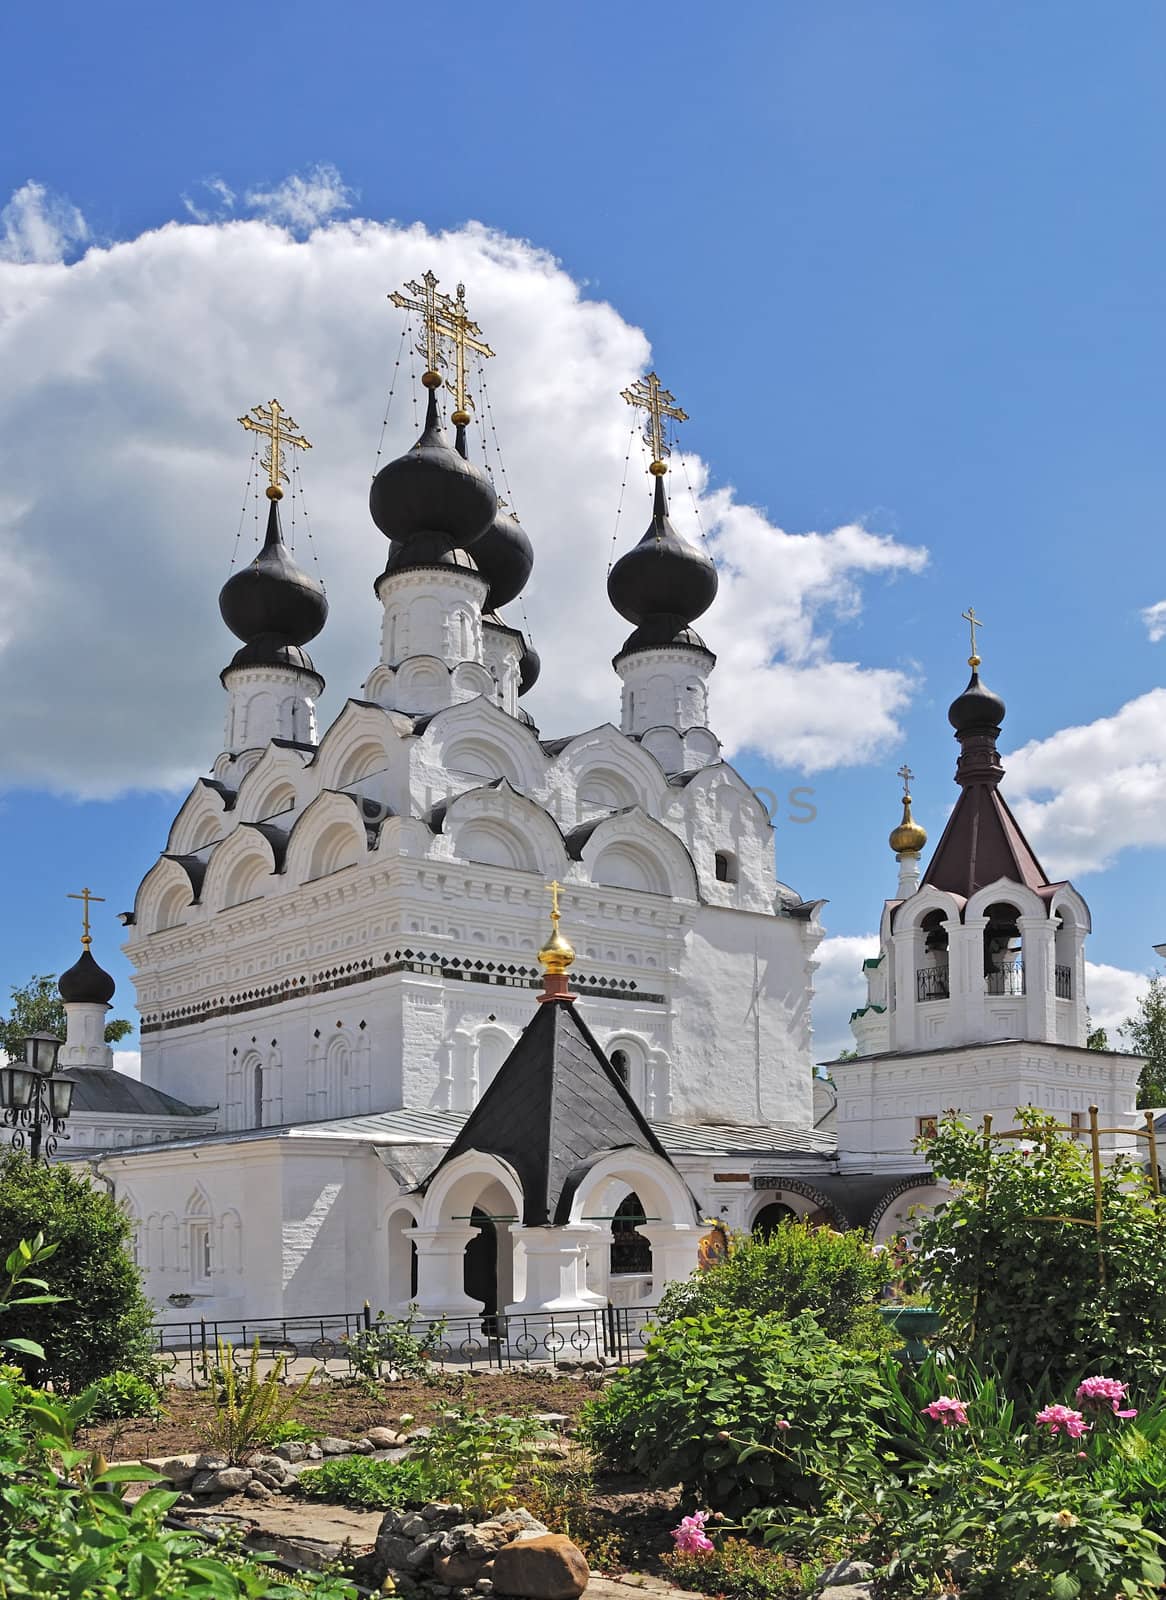 Trinity cathedral (1643) in Holy Trinity Monastery of Murom city, Vladimir region, Russia